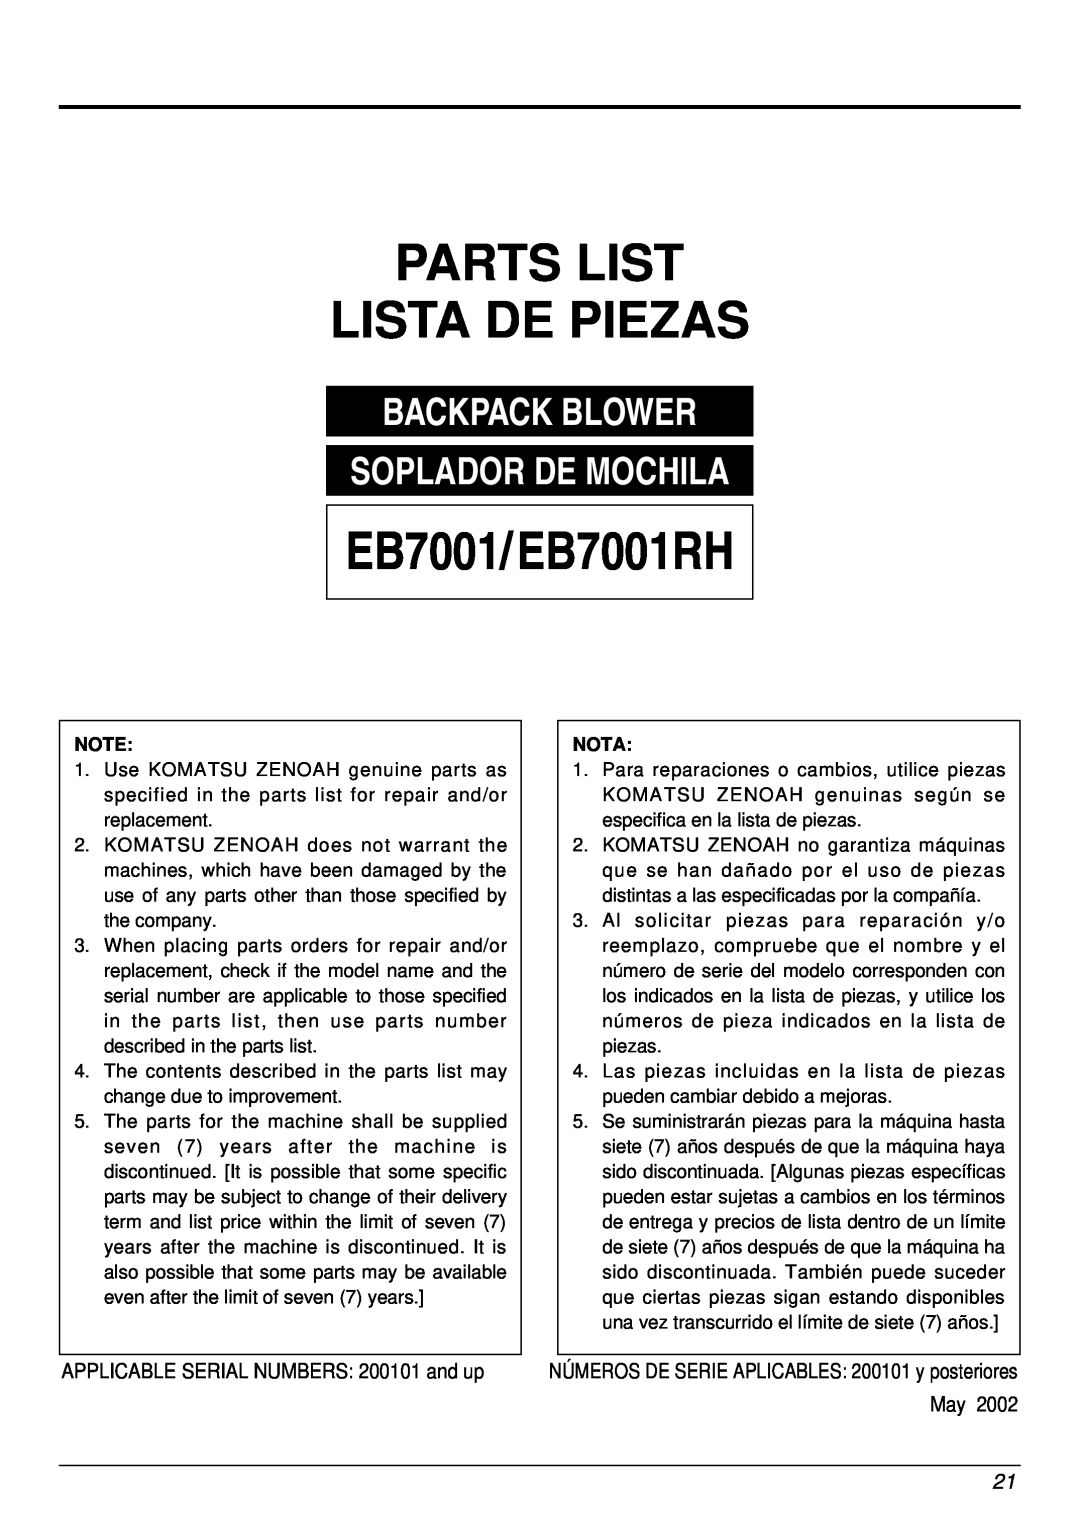 RedMax manual Parts List Lista De Piezas, APPLICABLE SERIAL NUMBERS 200101 and up, EB7001/ EB7001RH, Nota 